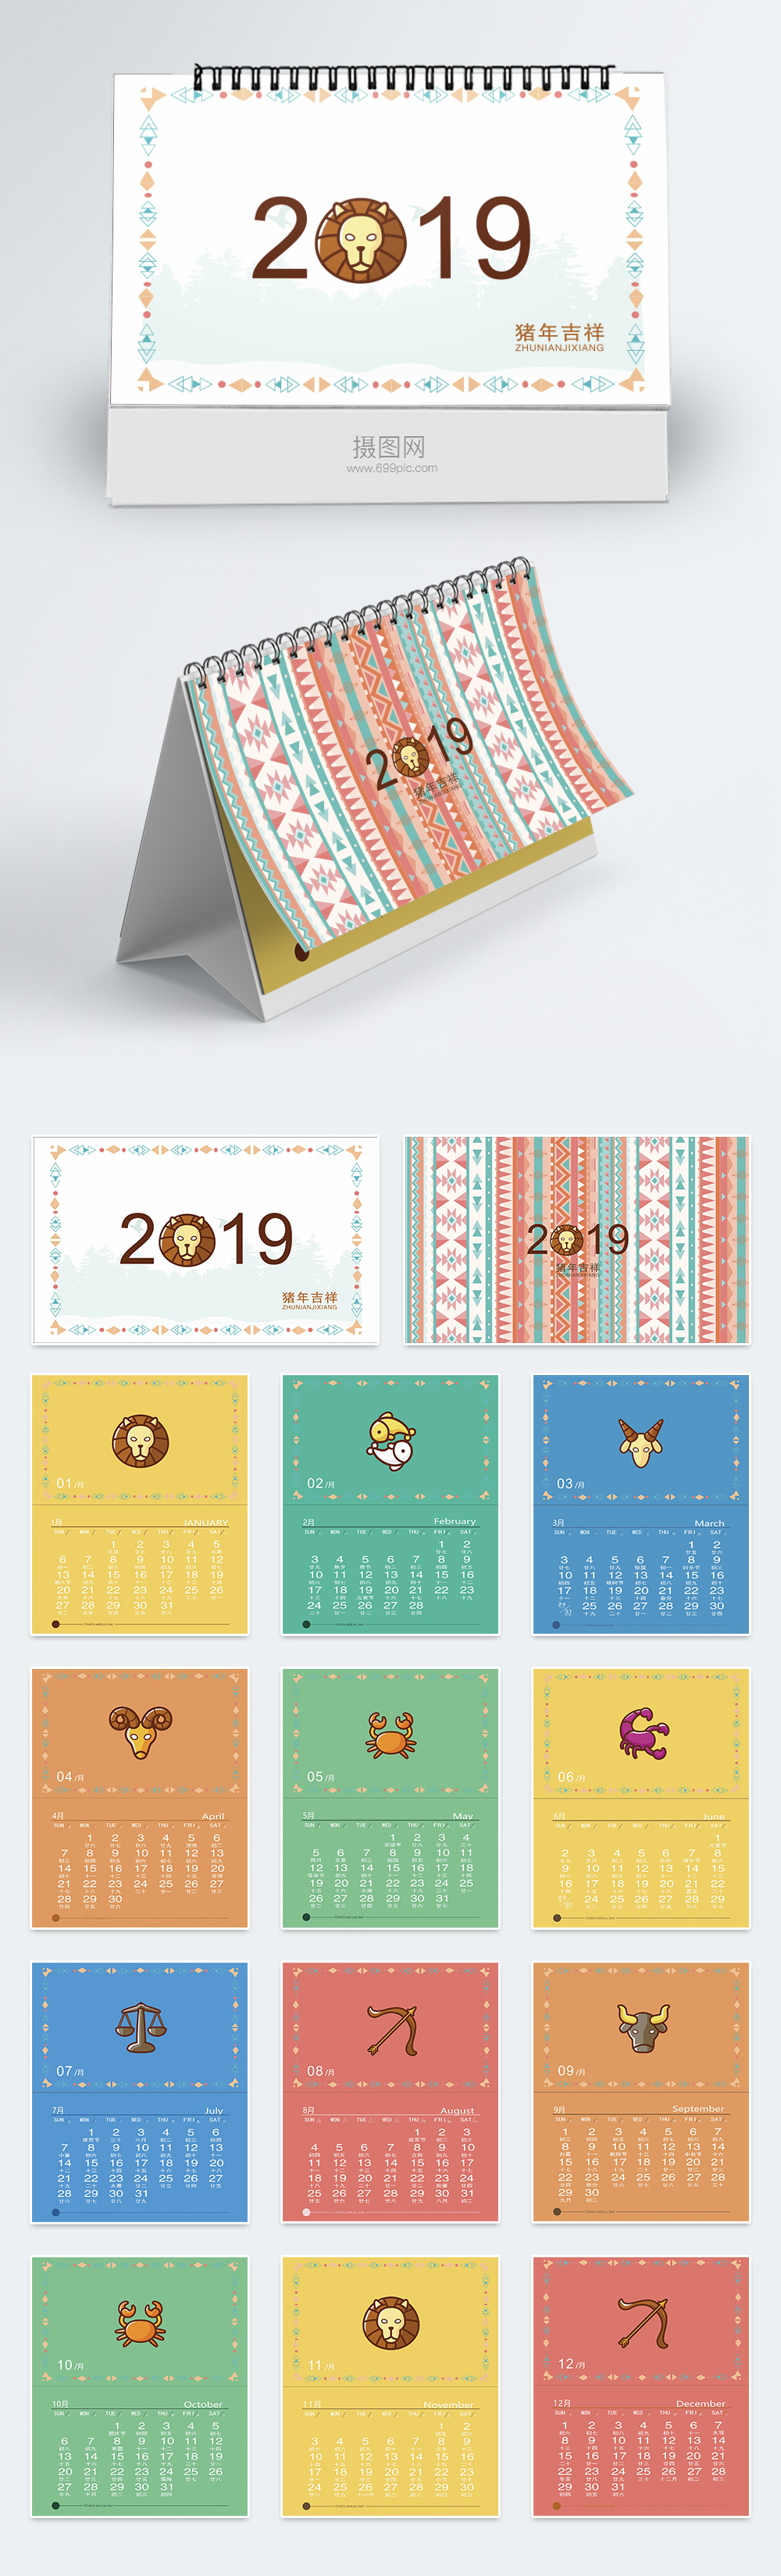 Constellation calendar template image picture free download 400751392